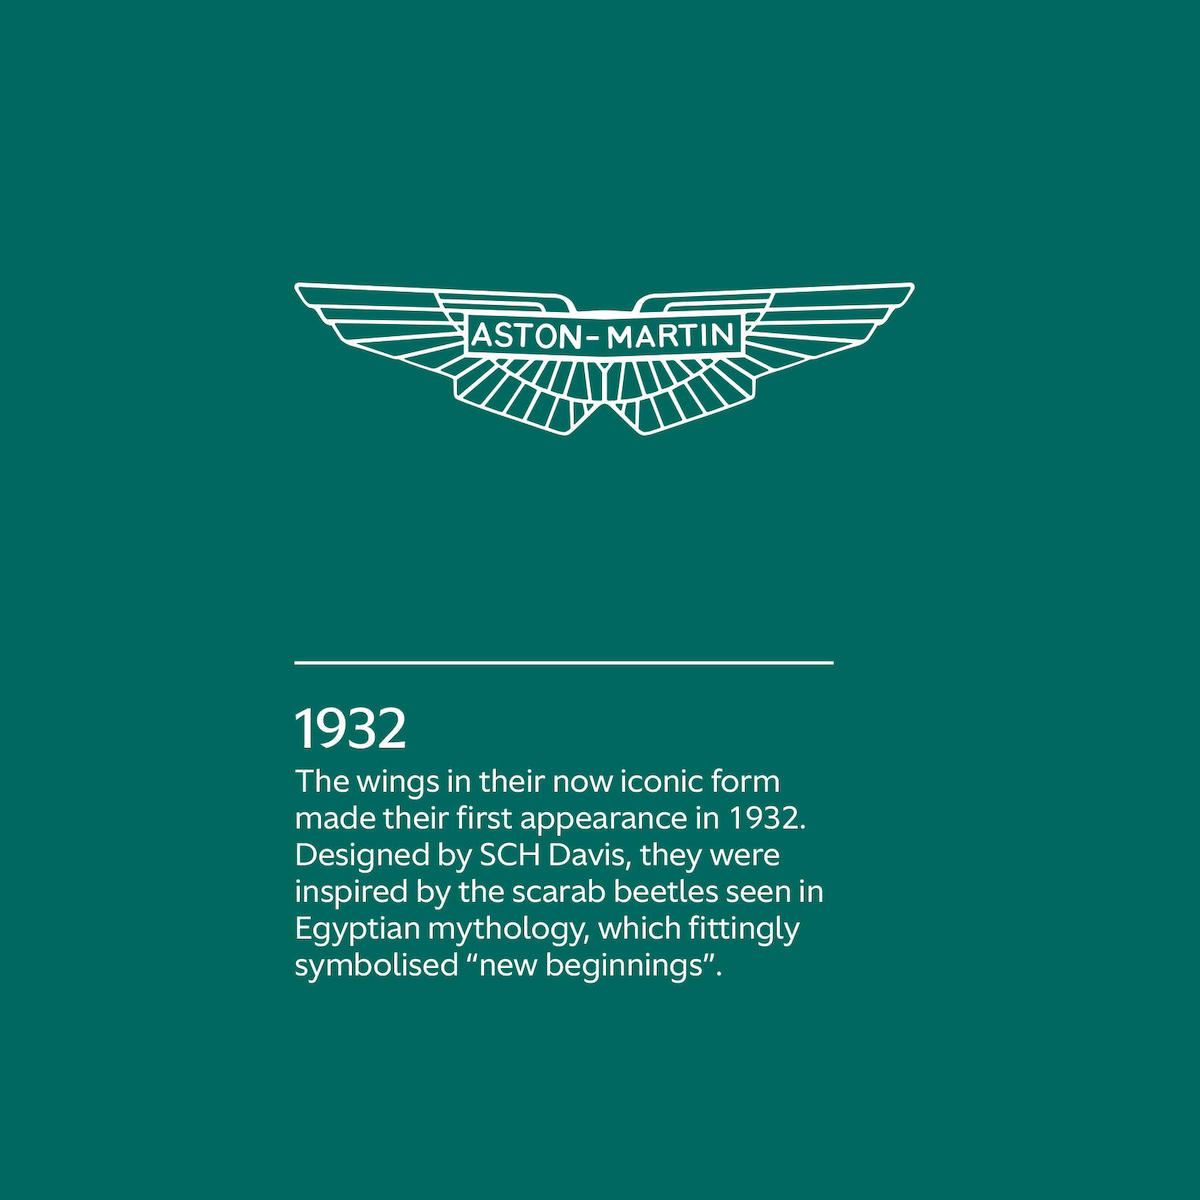 The 1932 version of the Aston Martin wings logo